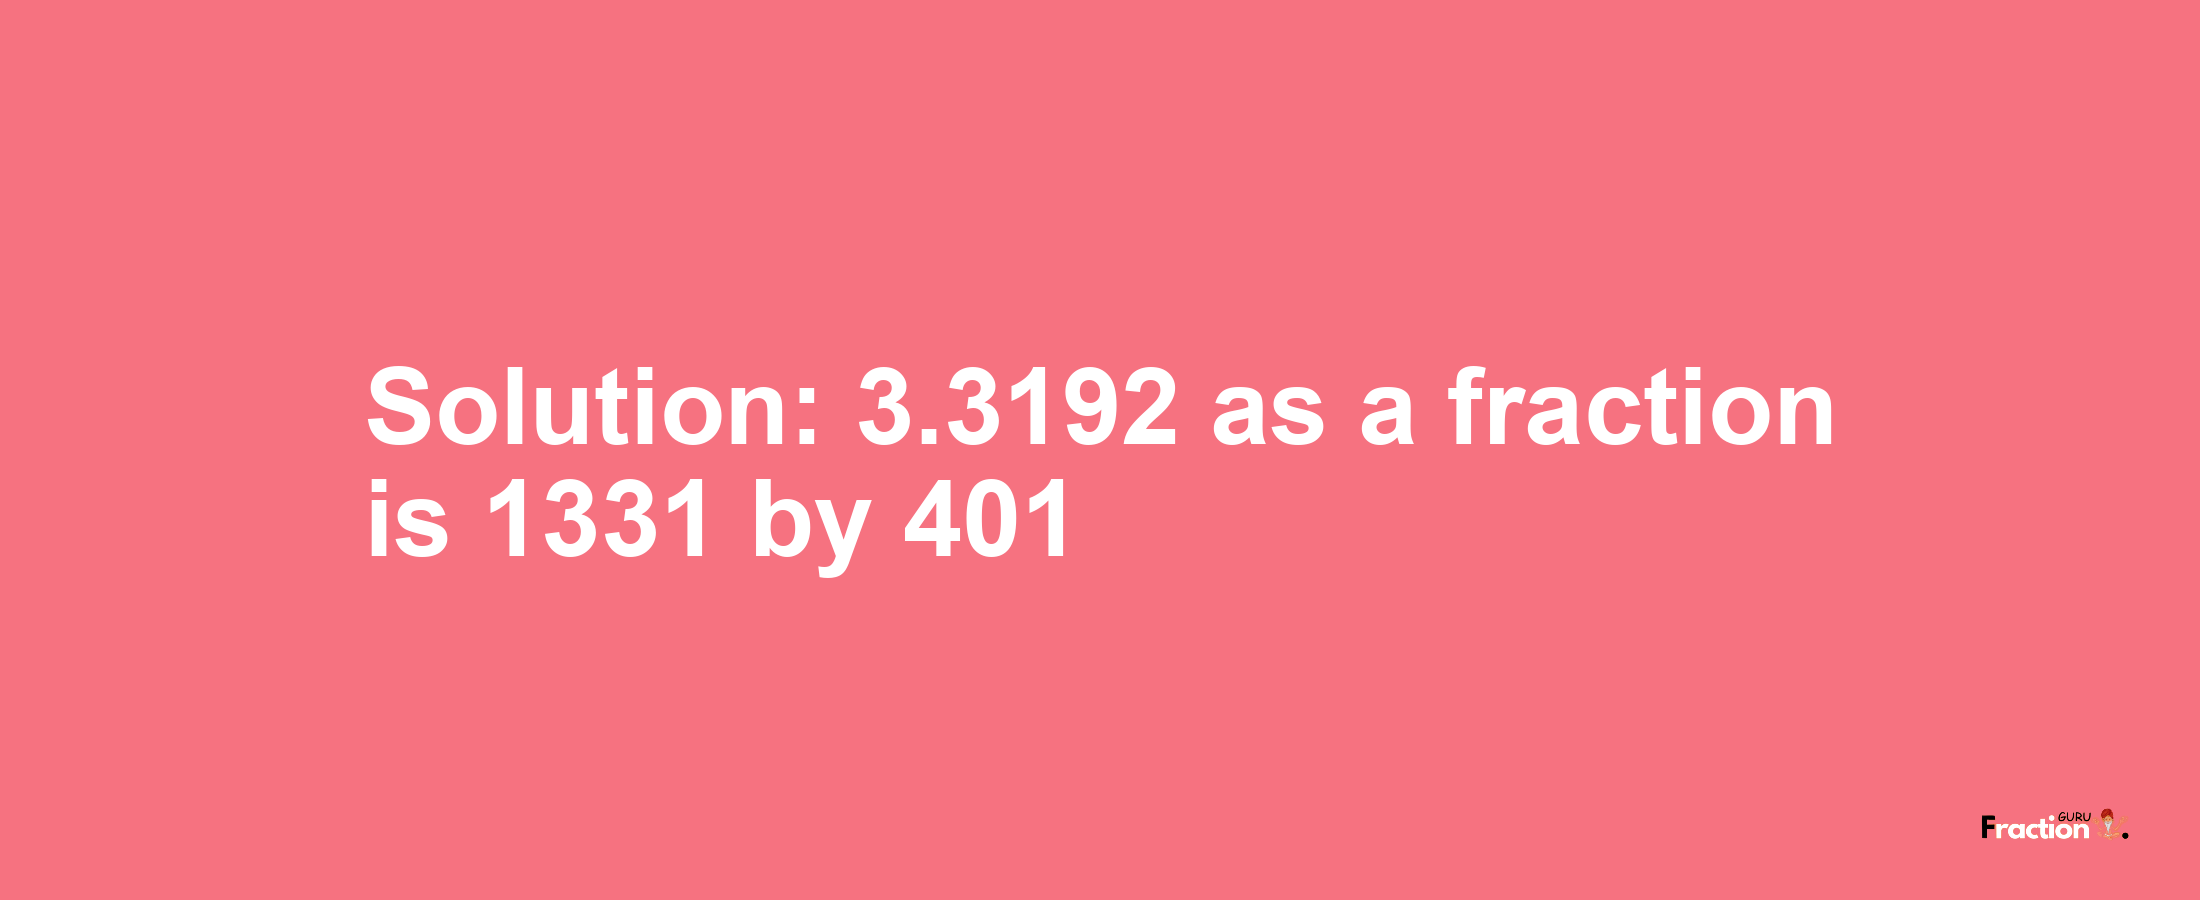 Solution:3.3192 as a fraction is 1331/401